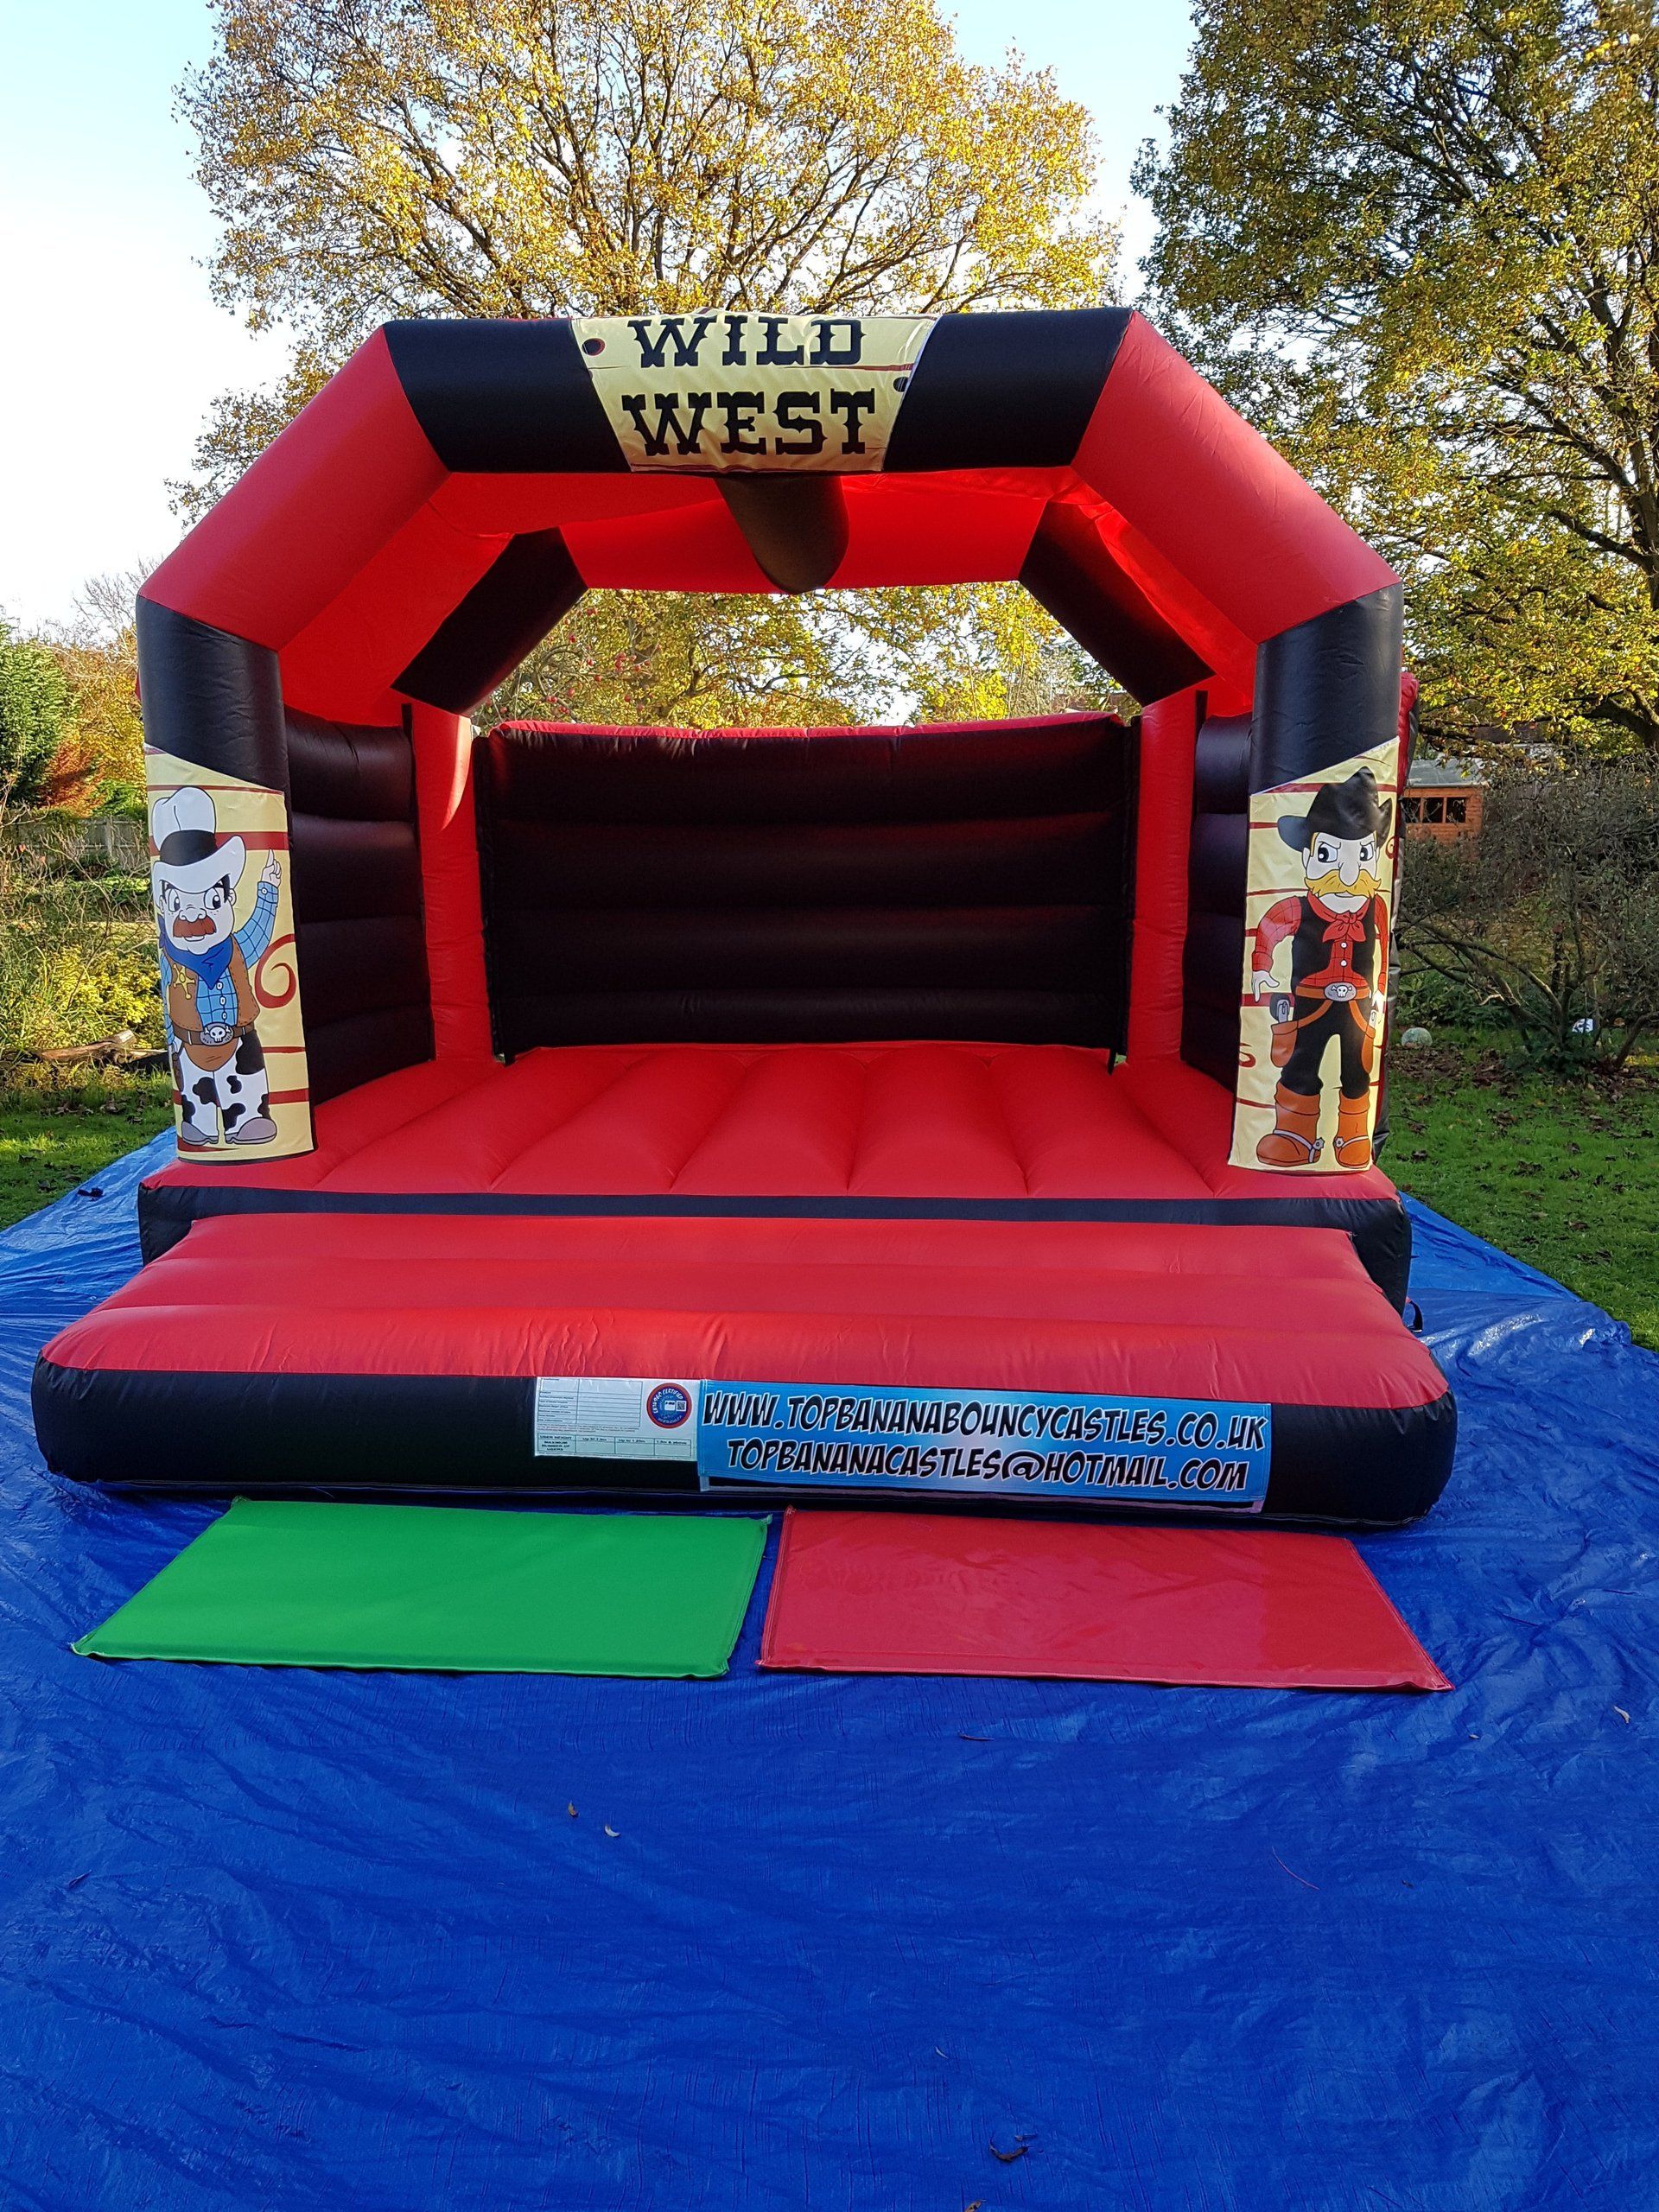 red and black adult bouncy castle with wild west artwork